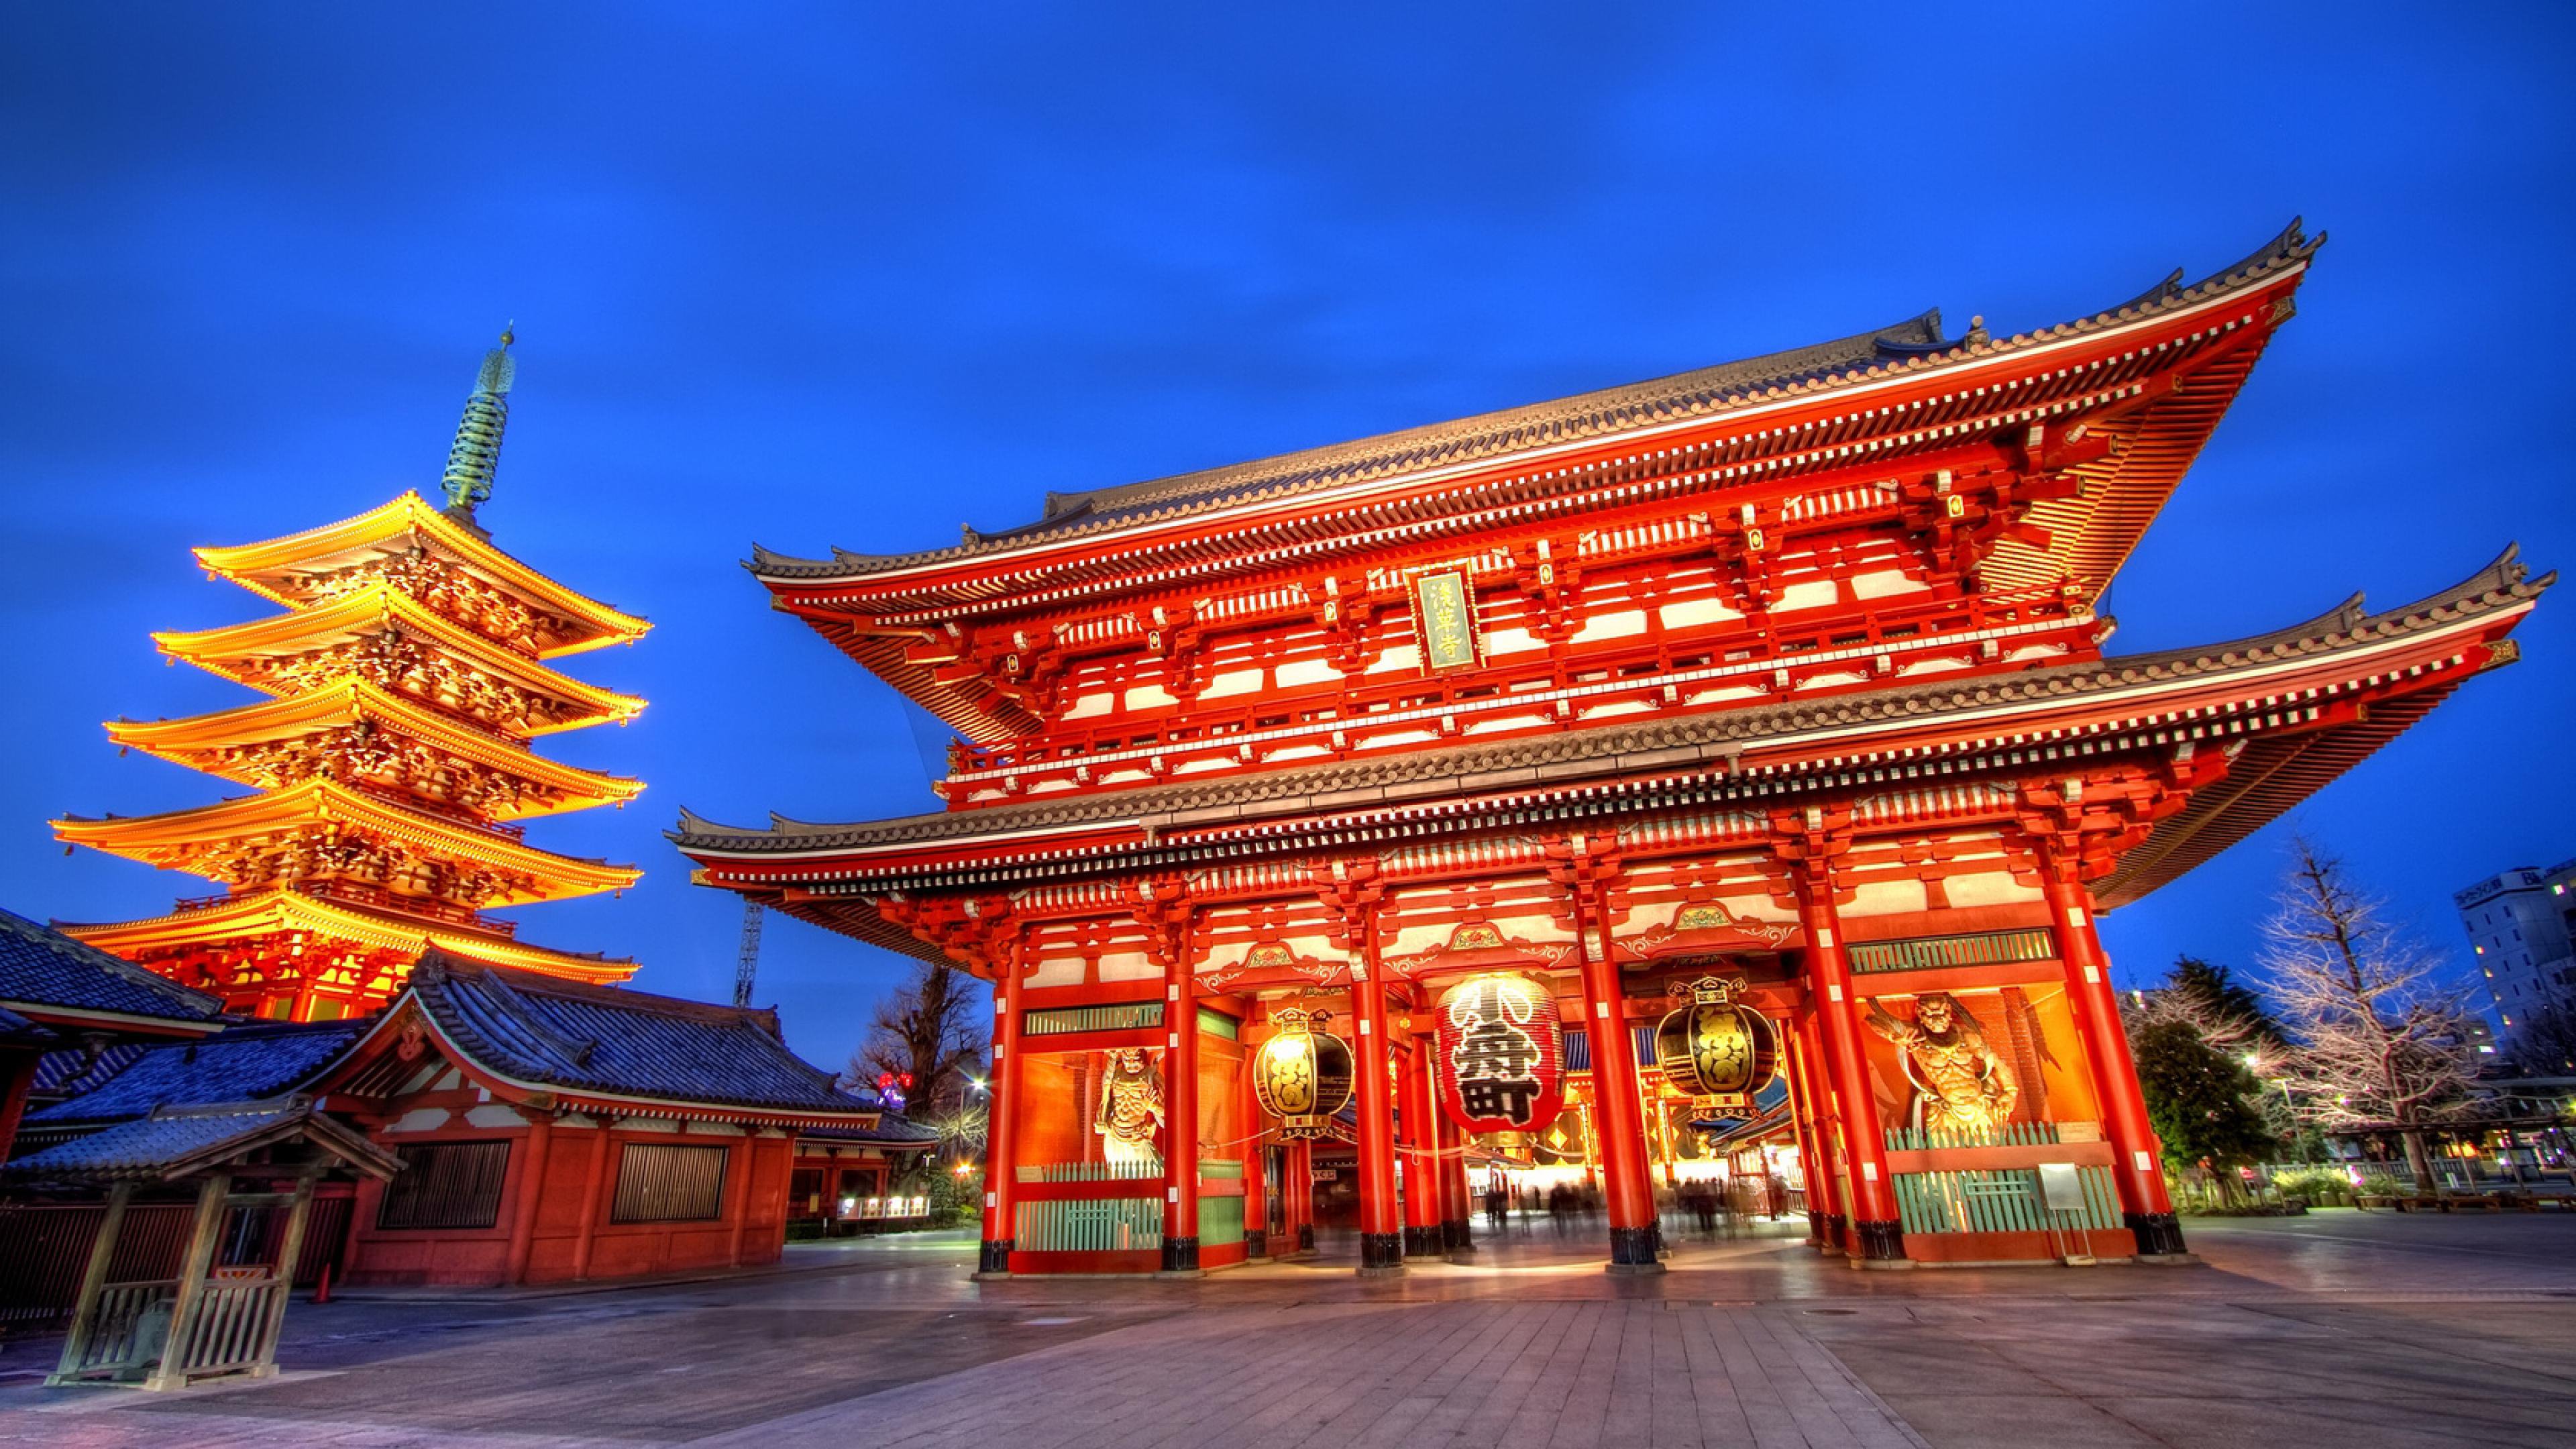 Japan 4K wallpaper for your desktop or mobile screen free and easy to download